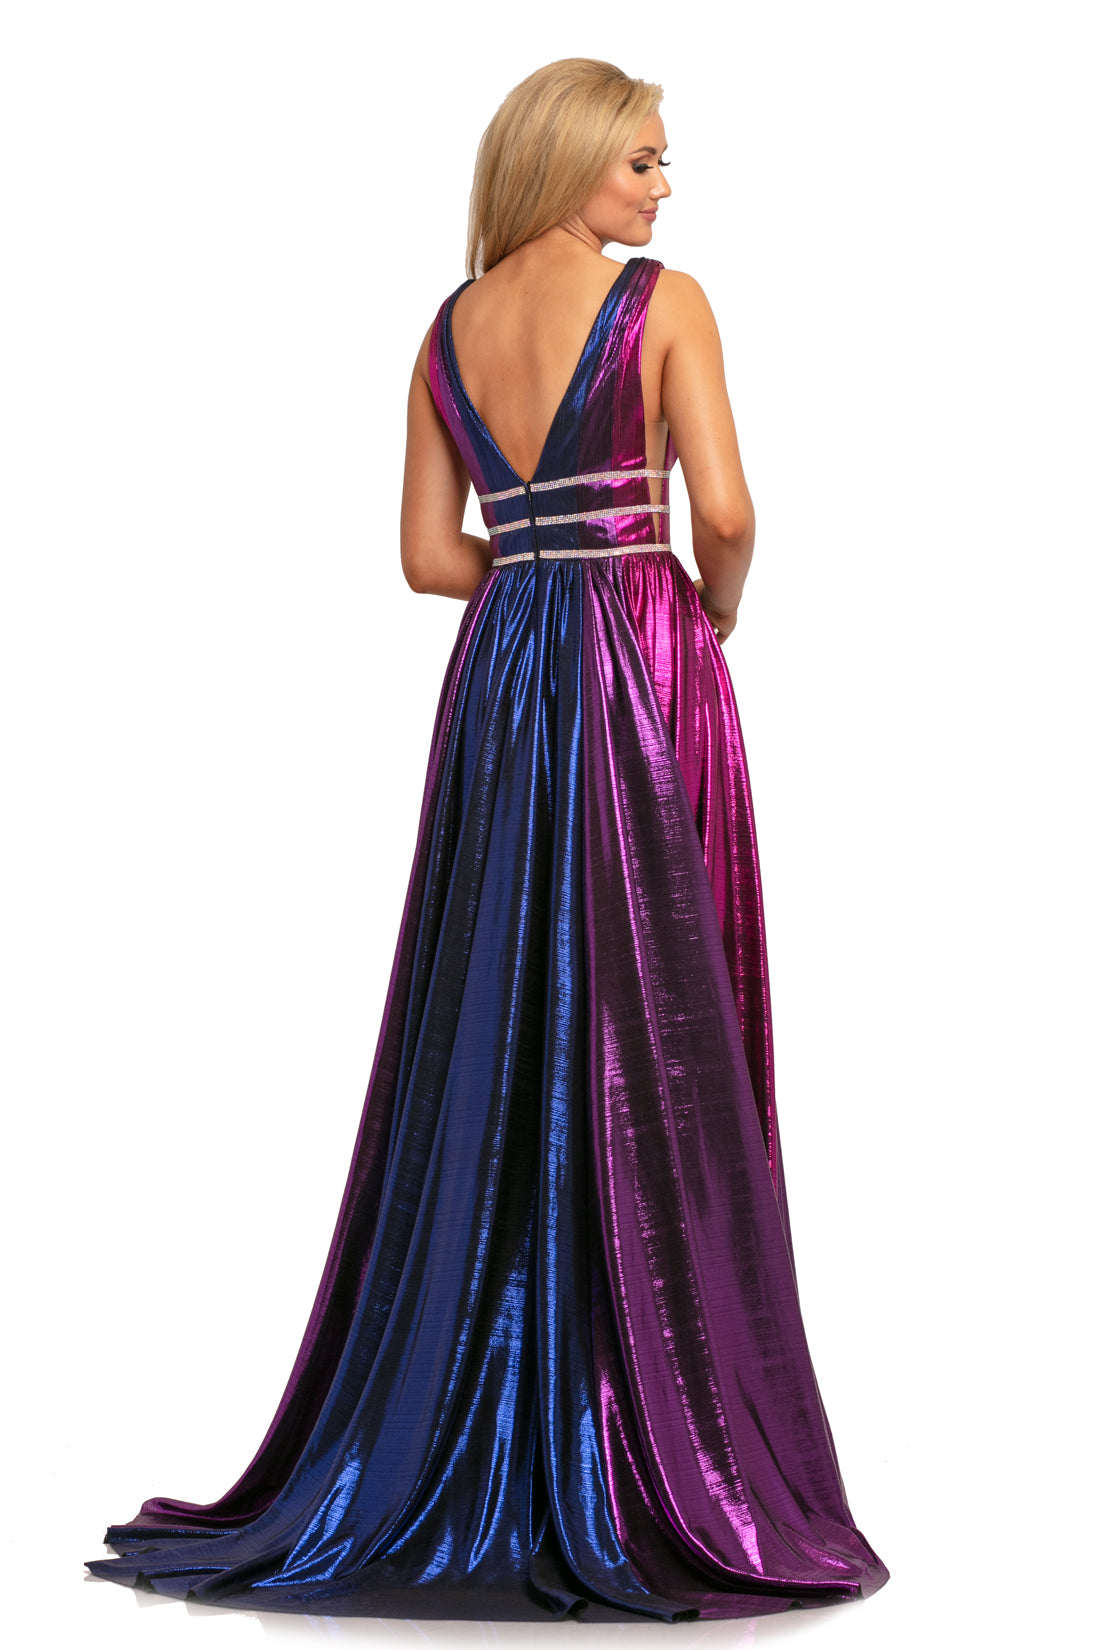 Johnathan Kayne 2008 is a Metallic Multi Color Prom Dress, Pageant Gown & Formal Evening Wear! This gown Features a Metallic Shimmer Multi Color Material. Deep V Plunging Neckline with a triple Crystal Embellished Waist Band. Sheer mesh Cutout side panels. Open V Back. The Pleated Skirt Features Yards of extra material for a lush look with the dimensional colors.